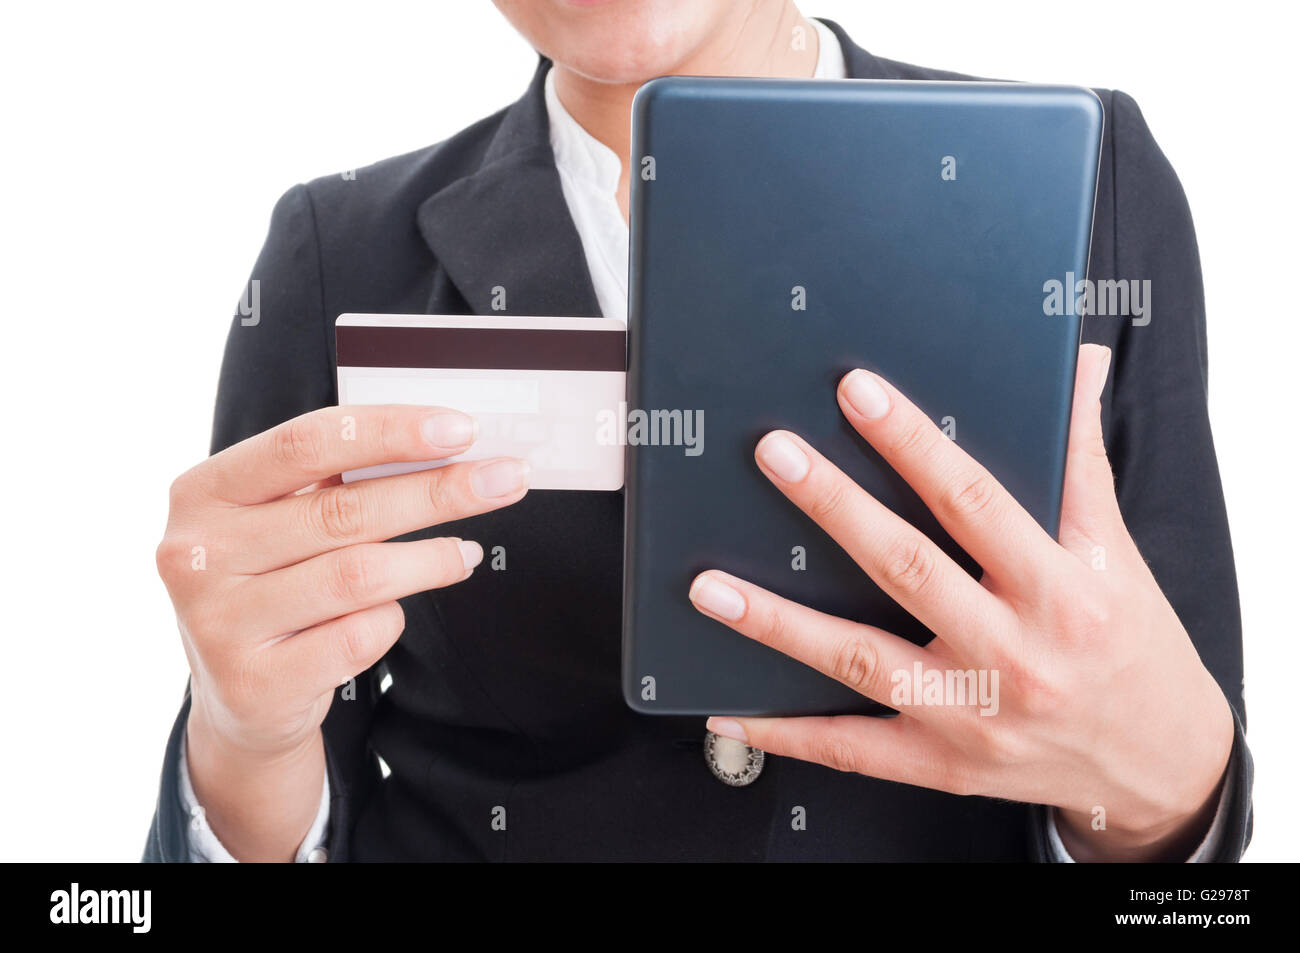 Buy online concept with debit or credit card and wireless internet tablet pc Stock Photo